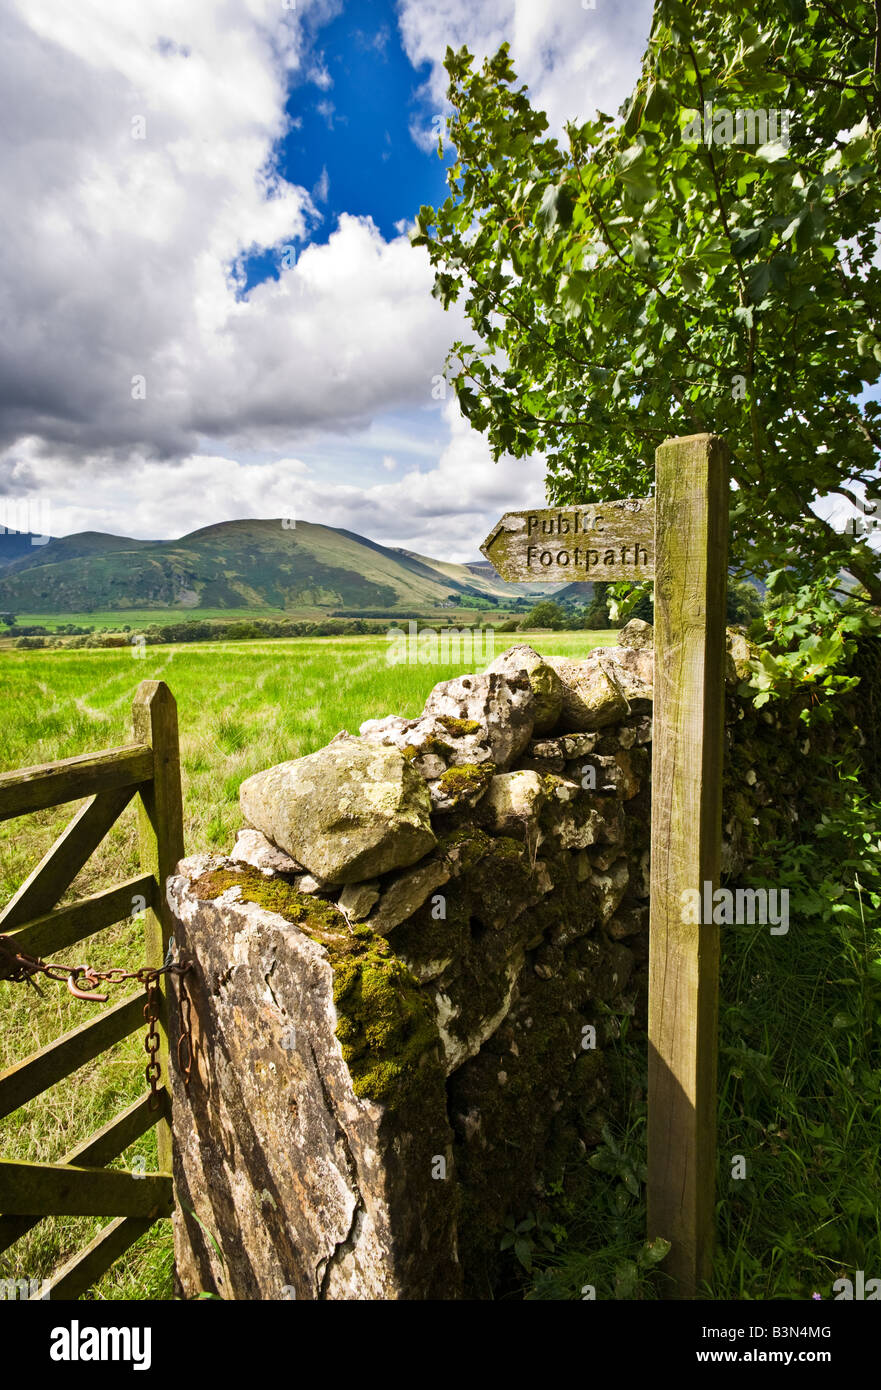 Typical English Lake District countryside scene with wooden direction signpost dry stone wall and gate Cumbria England UK Stock Photo